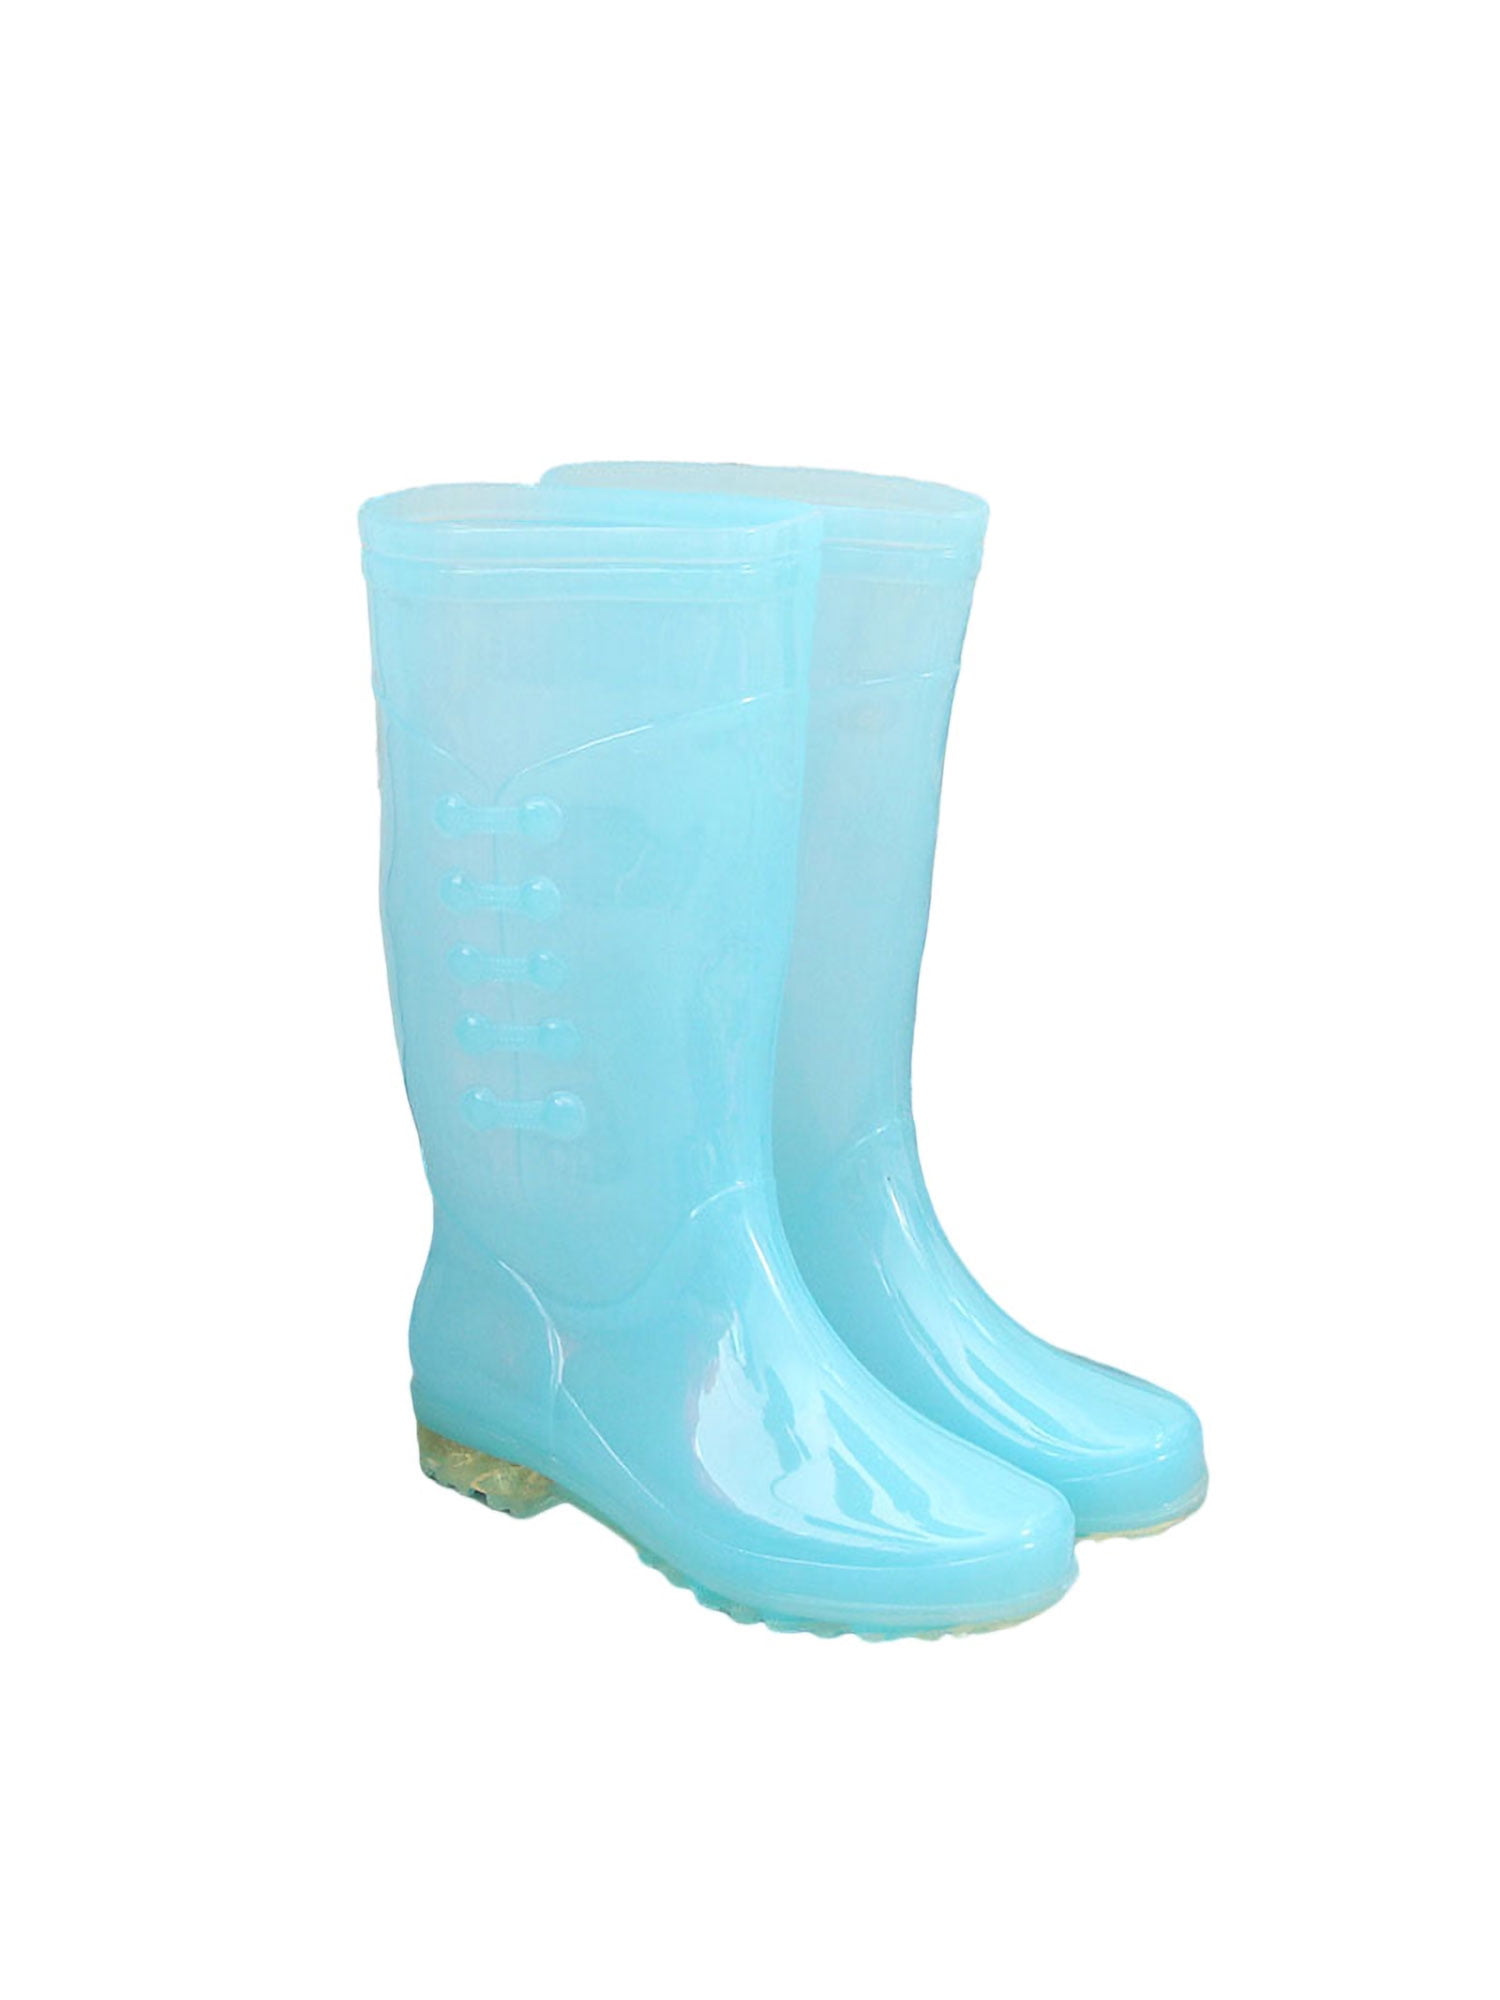 Crafted Kids Wellies Infants Outdoor Mid Calf Boots Rubber Waterproof Shoes 